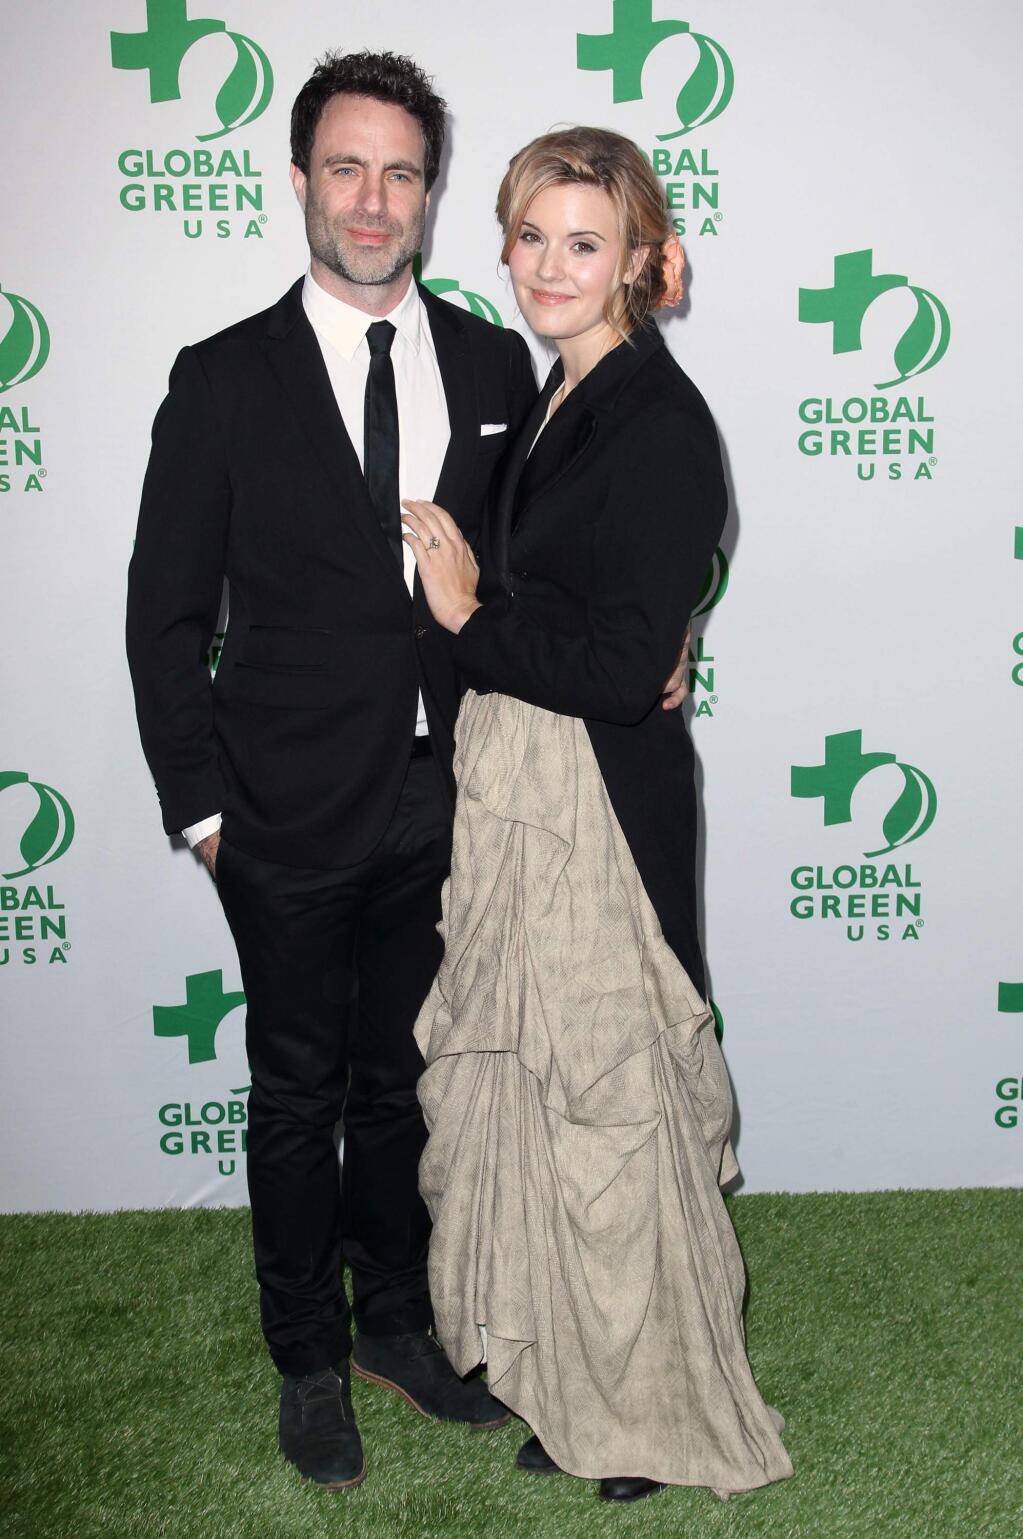 Matthew Cooke, left, and Maggie Grace arrive at the Global Green USA's 12th Annual Pre-Oscar Party at the Avalon Hollywood on Wednesday, Feb. 18, 2015, in Los Angeles. (Photo by John Salangsang/Invision/AP)